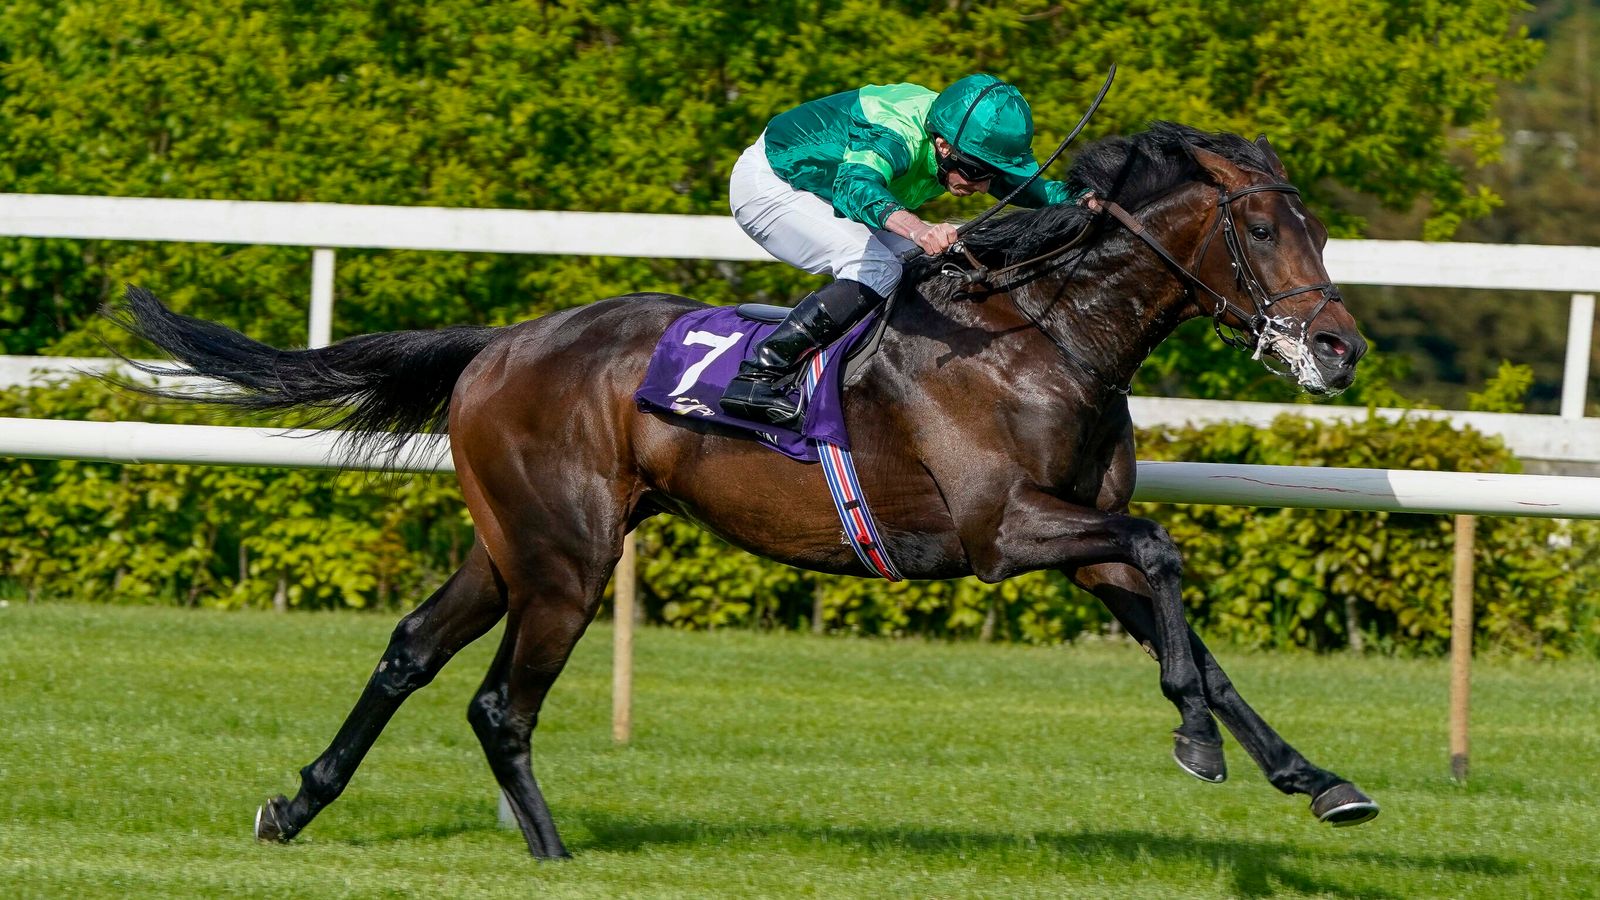 Today on Sky Sports Racing: Shergar Cup headlines stellar Saturday at Ascot as Frankie Dettori captains Team Europe